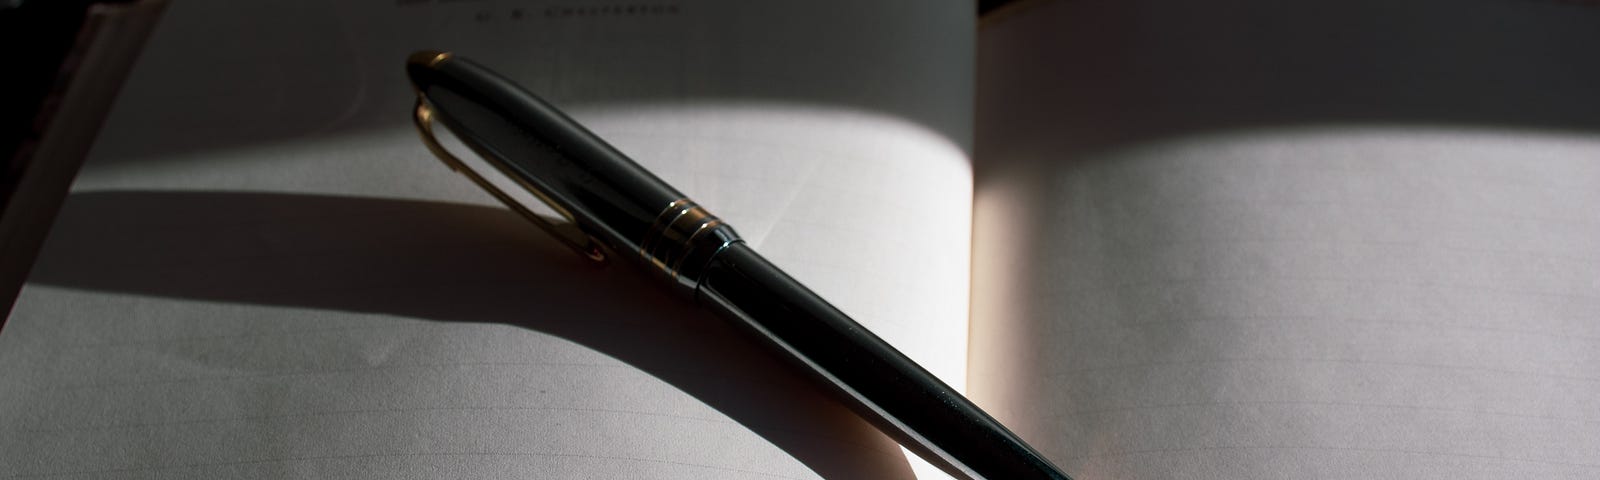 A pen lying across a blank notebook and casting a shadow.